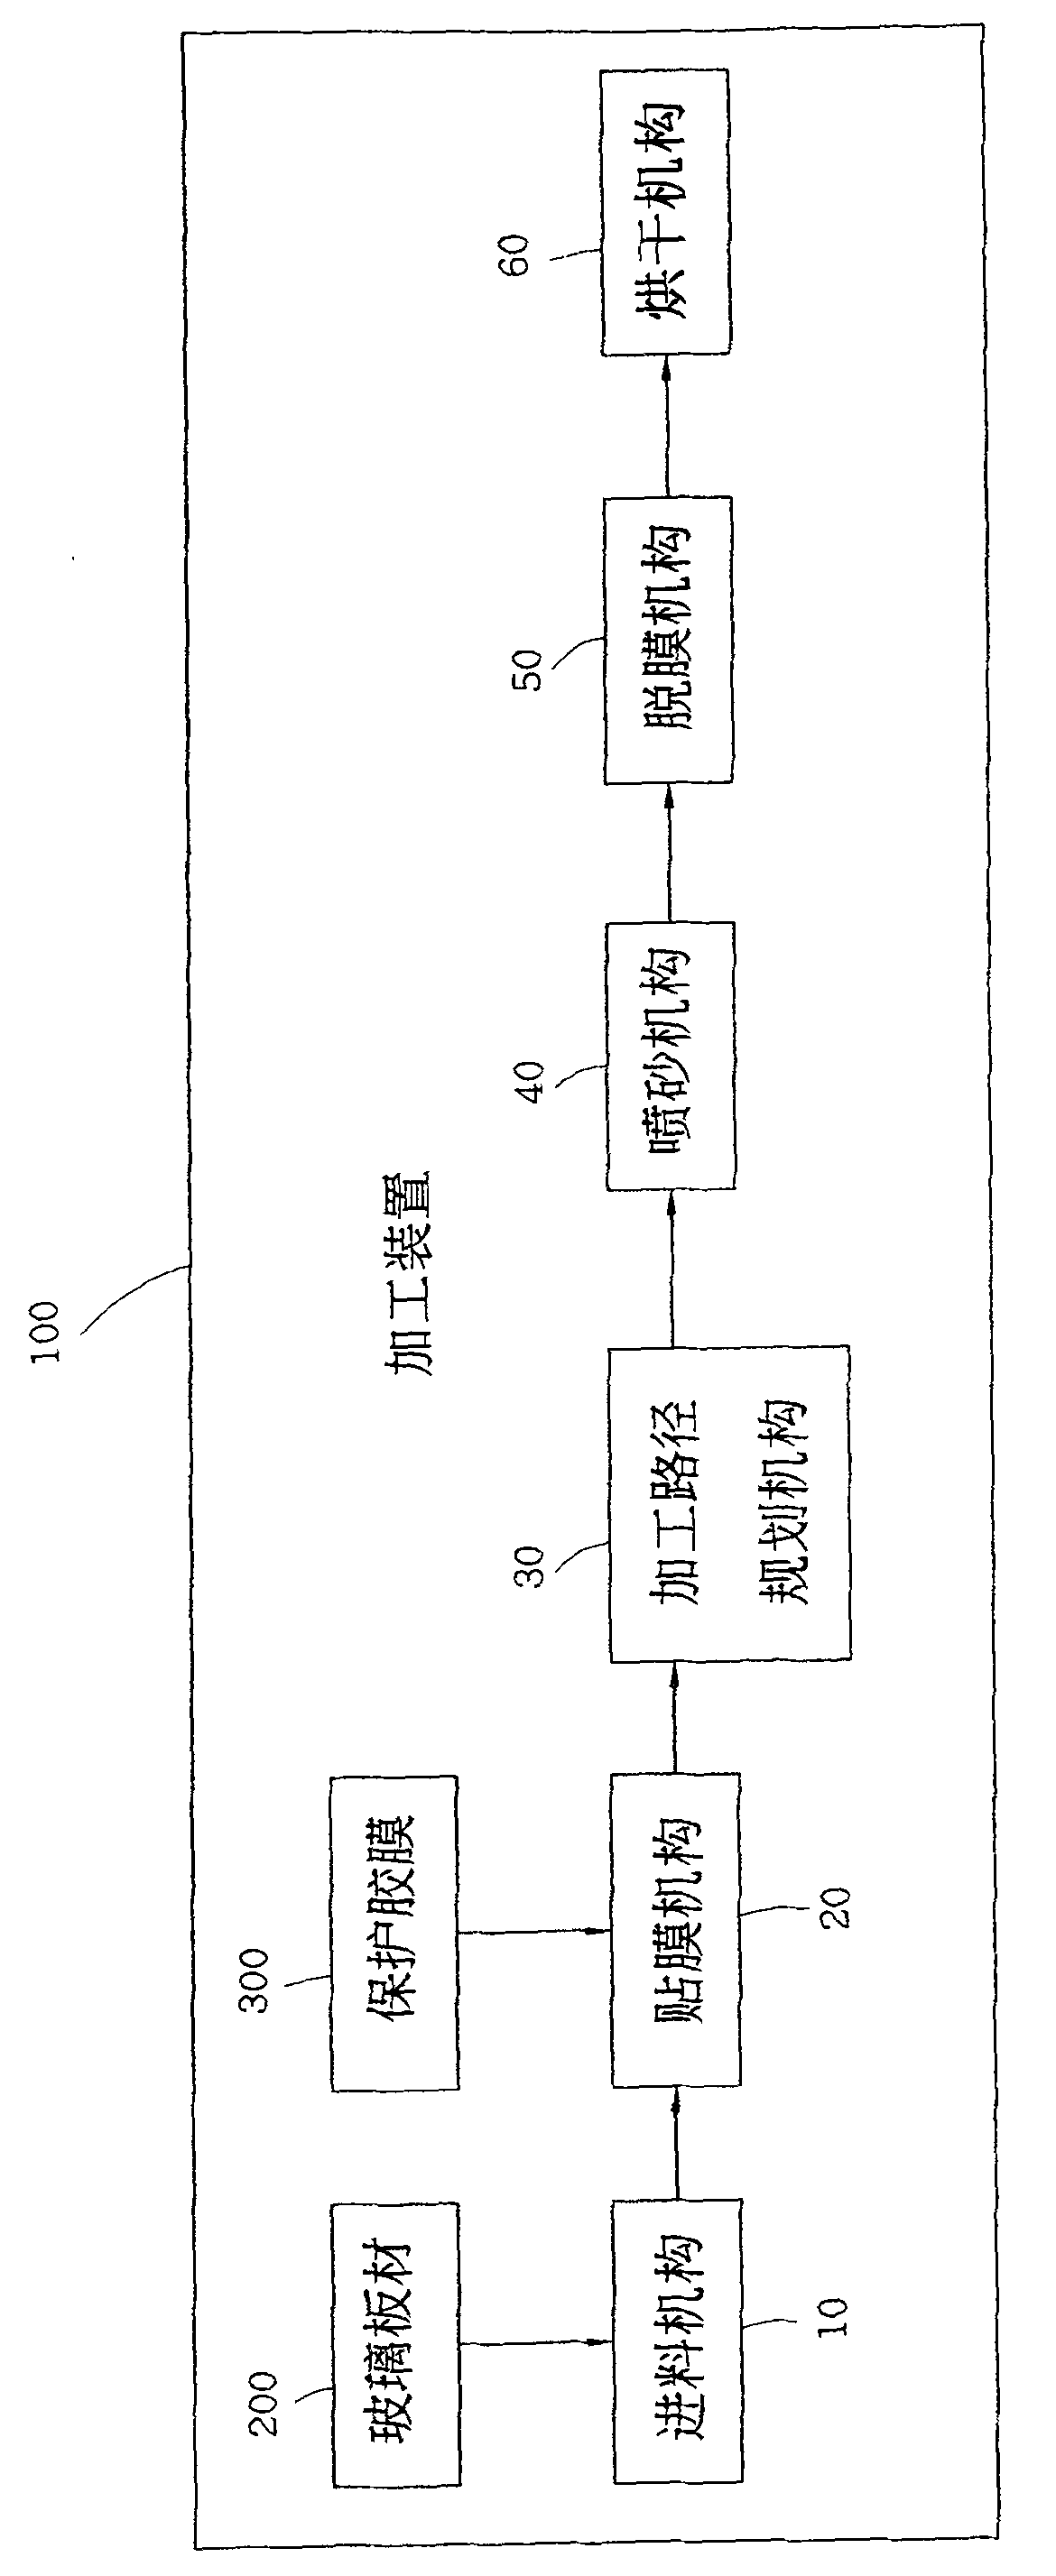 Device and method for processing glass sheet material